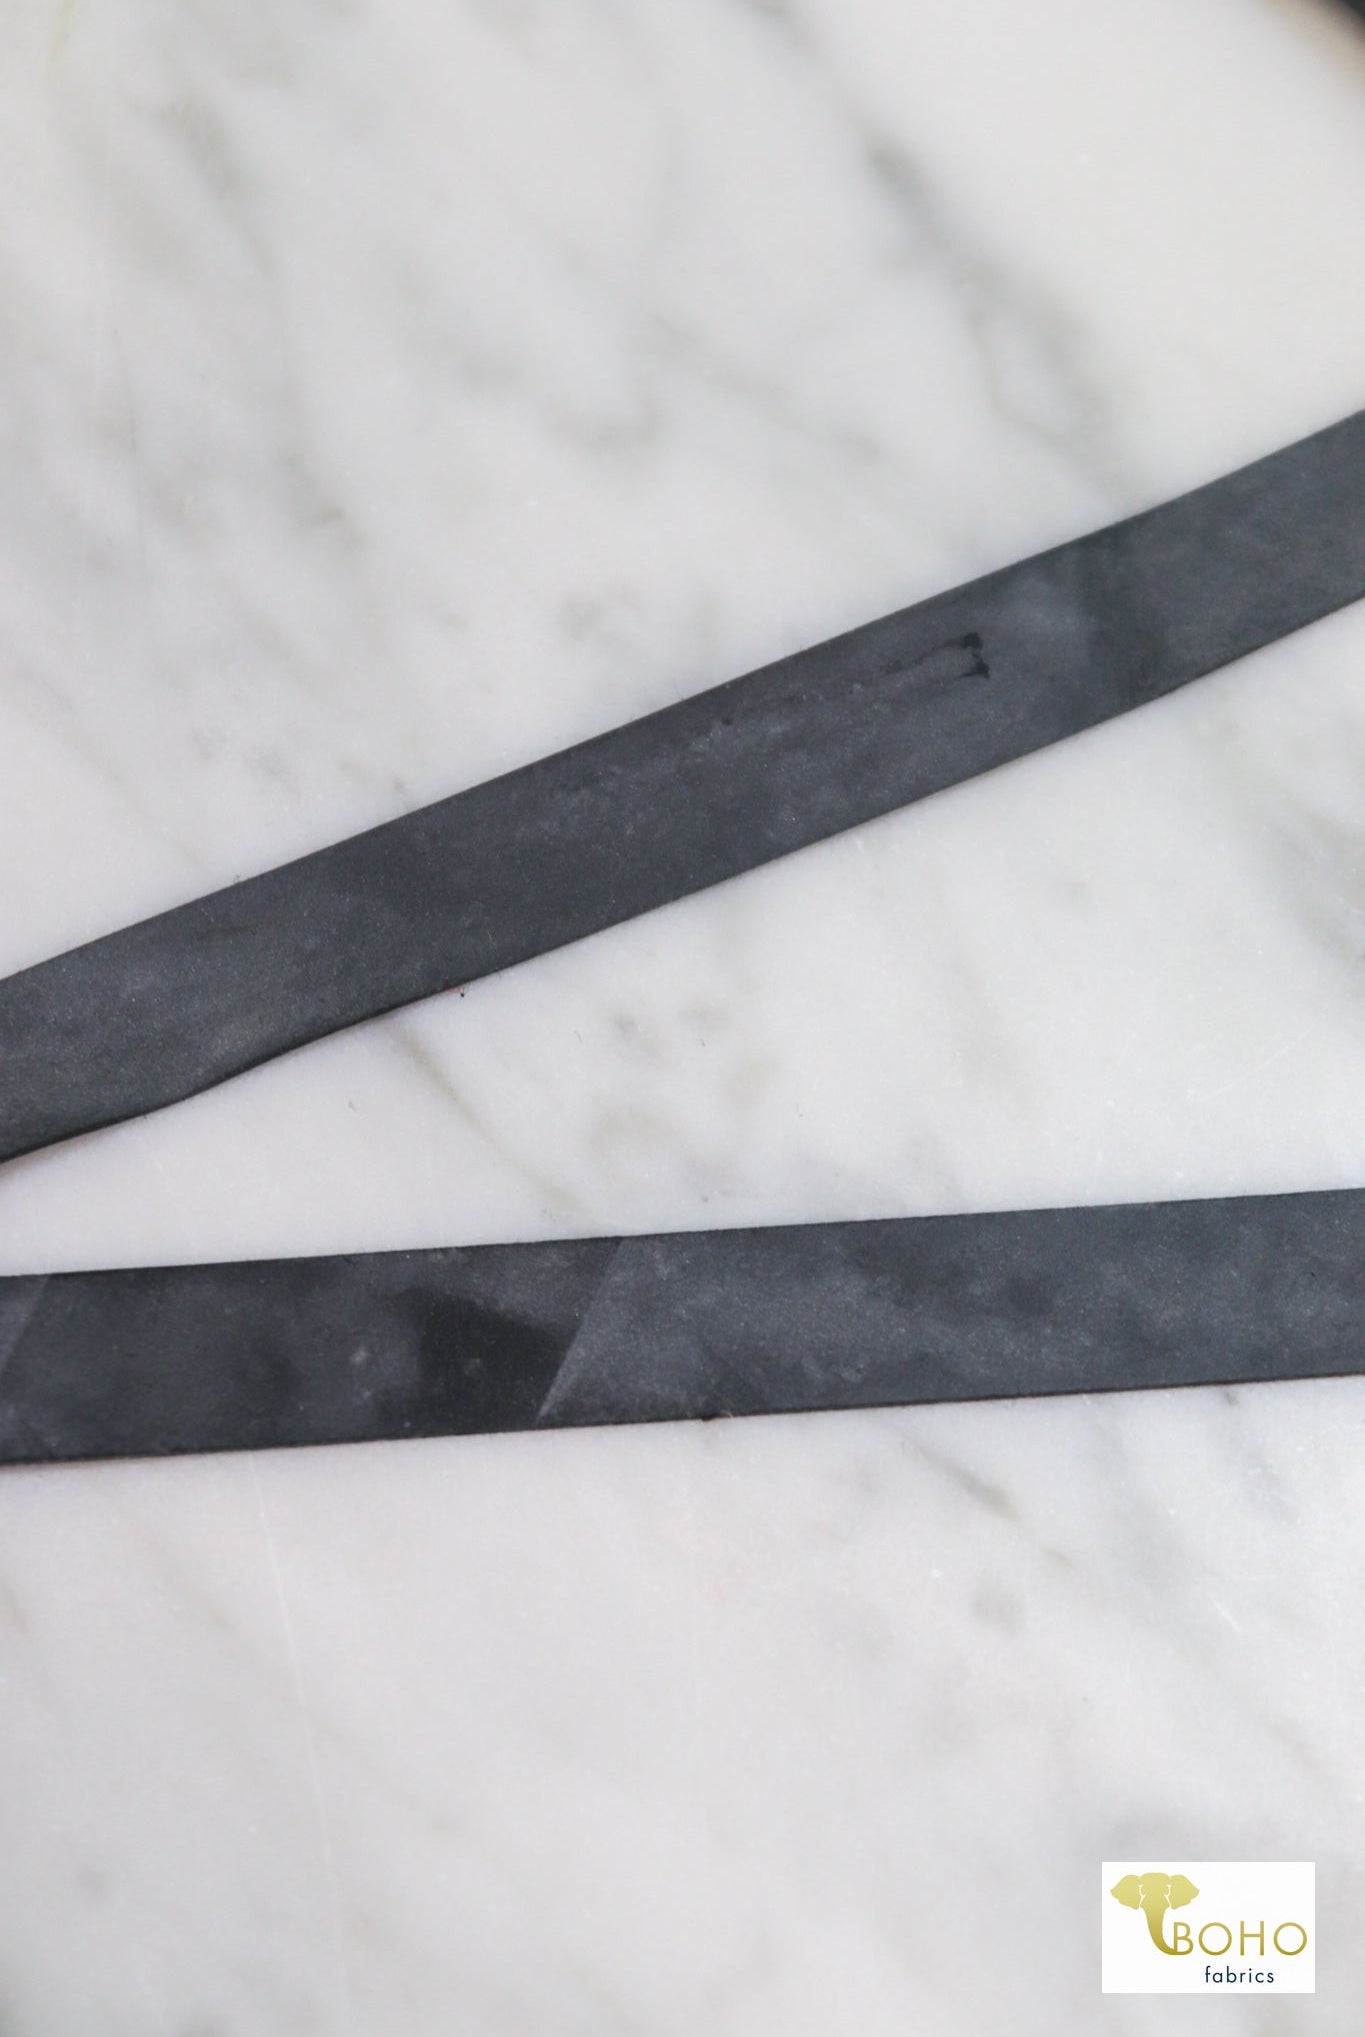 3/8" Black/Gray Rubber Elastic (Commonly Used for Swimwear). Sold in packs of 3, 5, & 10 Yards. - Boho Fabrics